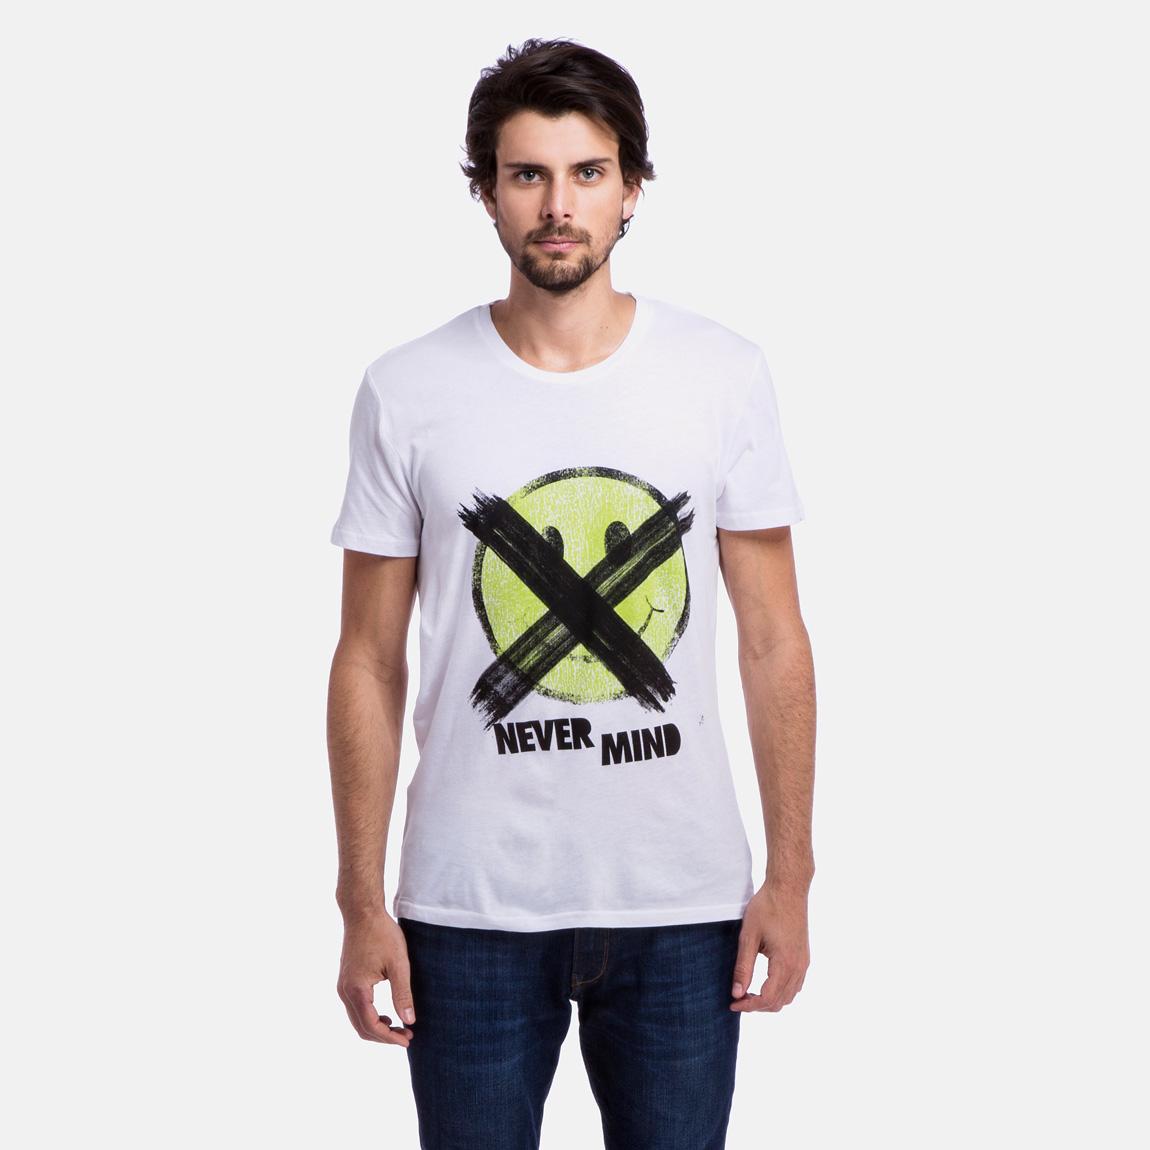 Bruce Printed Tee Never Smile – White Cheap Monday T-Shirts & Vests ...